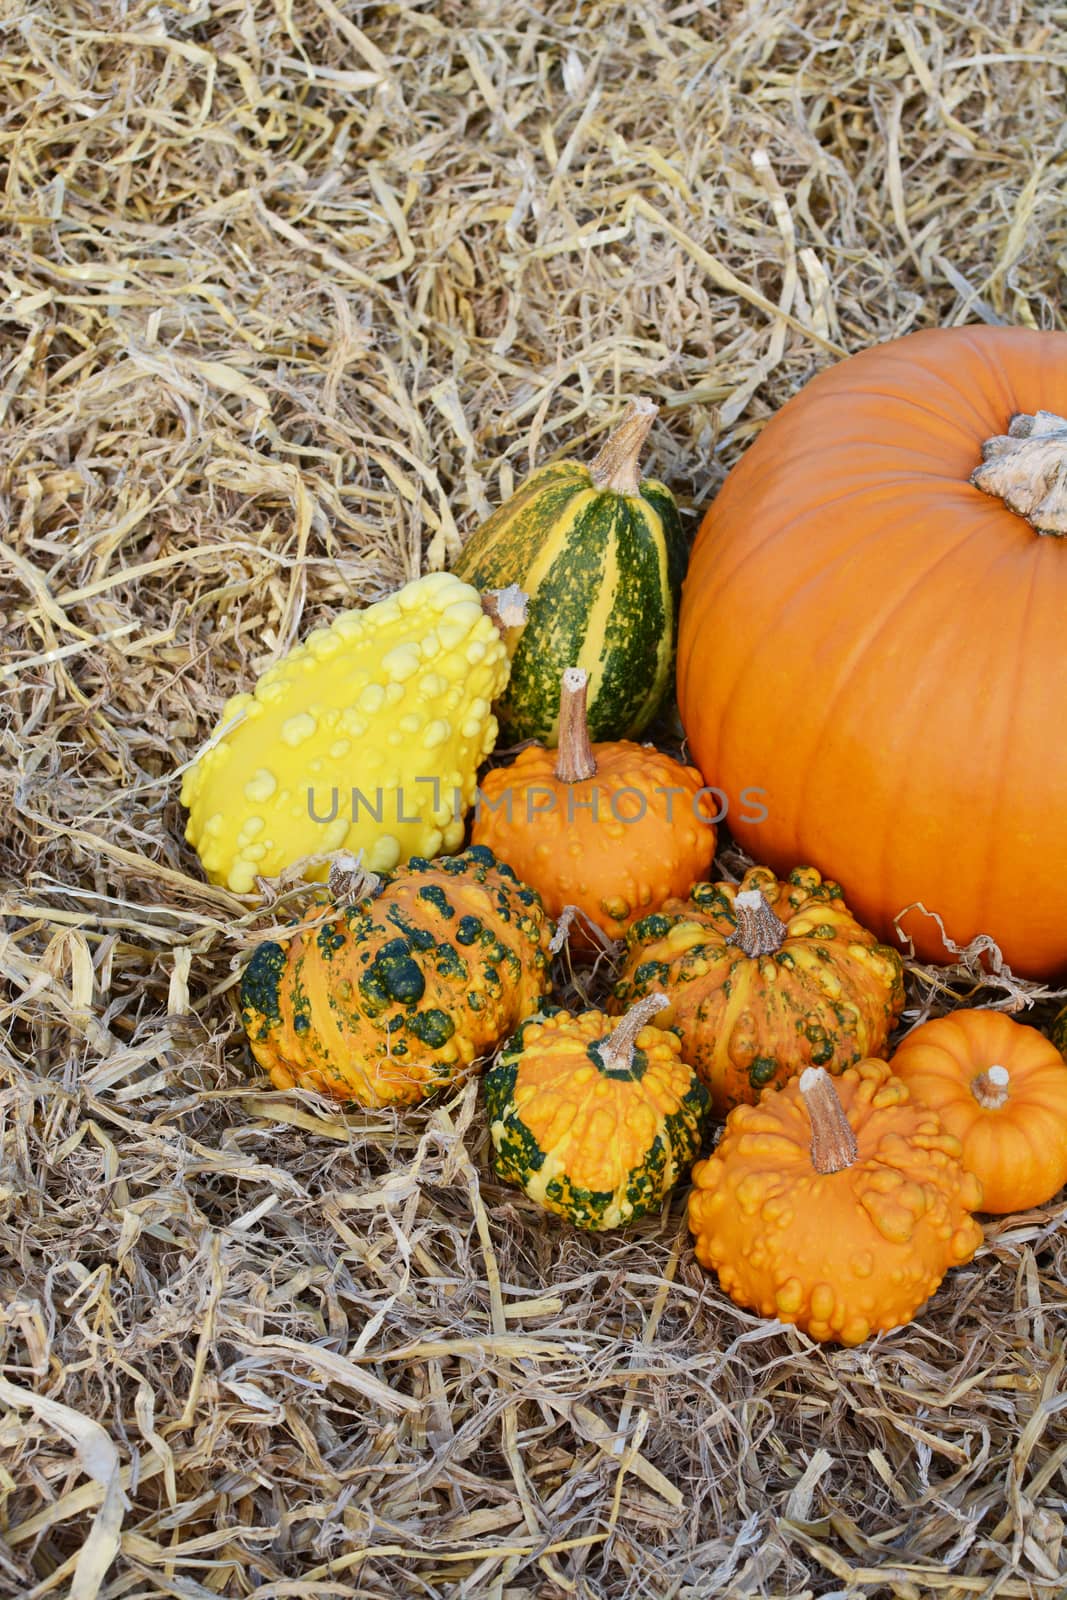 Ornamental warted gourds - green, yellow and orange - around a large pumpkin cropped right on straw